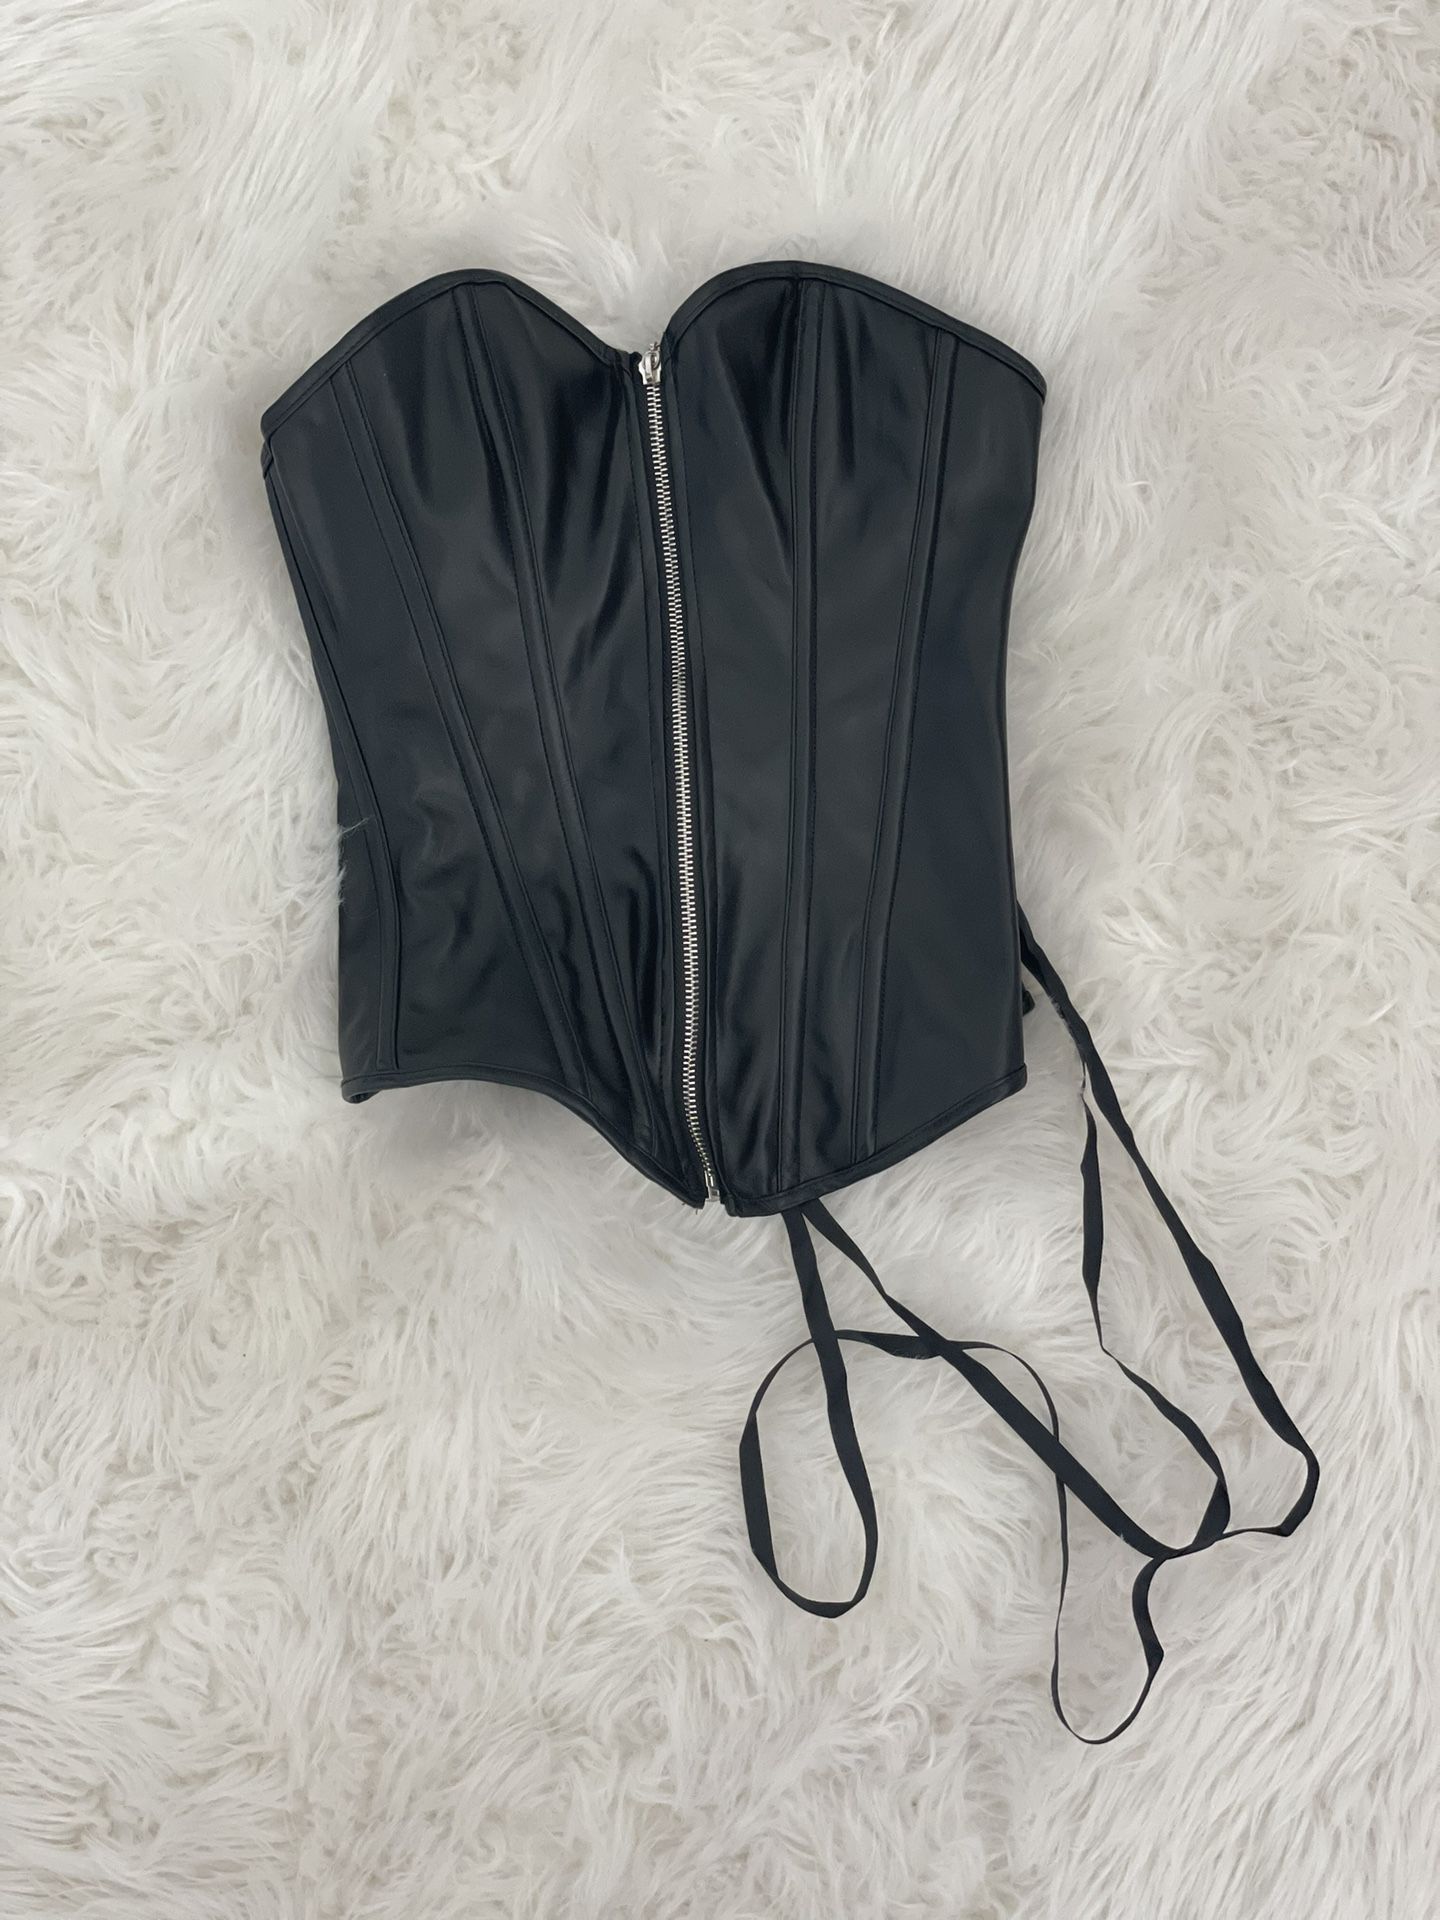 Black lace-up leather corset, size small 